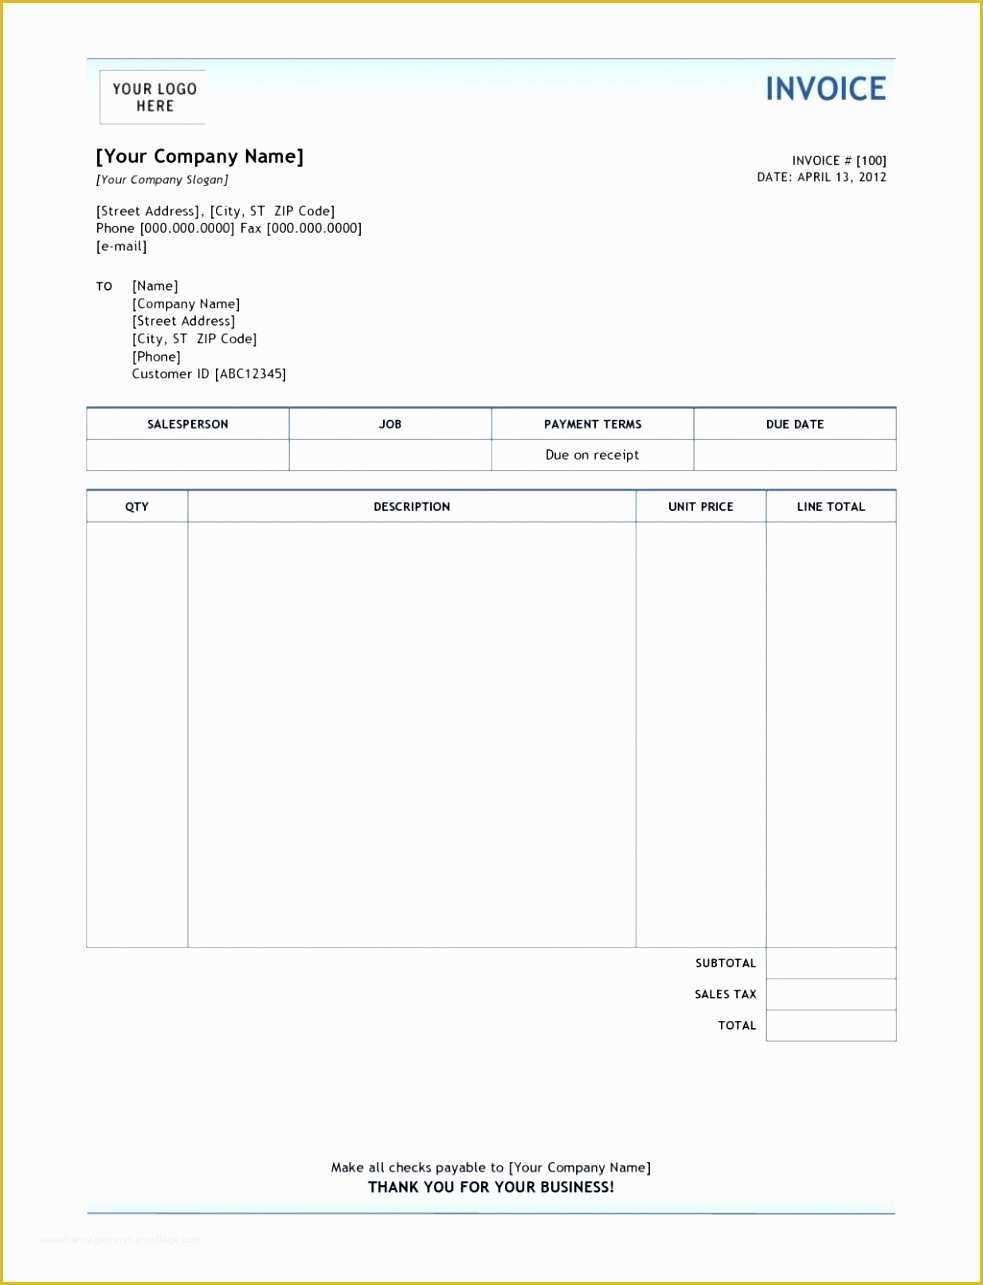 Quickbooks Templates Download Free Of 7 Quickbooks Invoice Templates Free Download Rptio